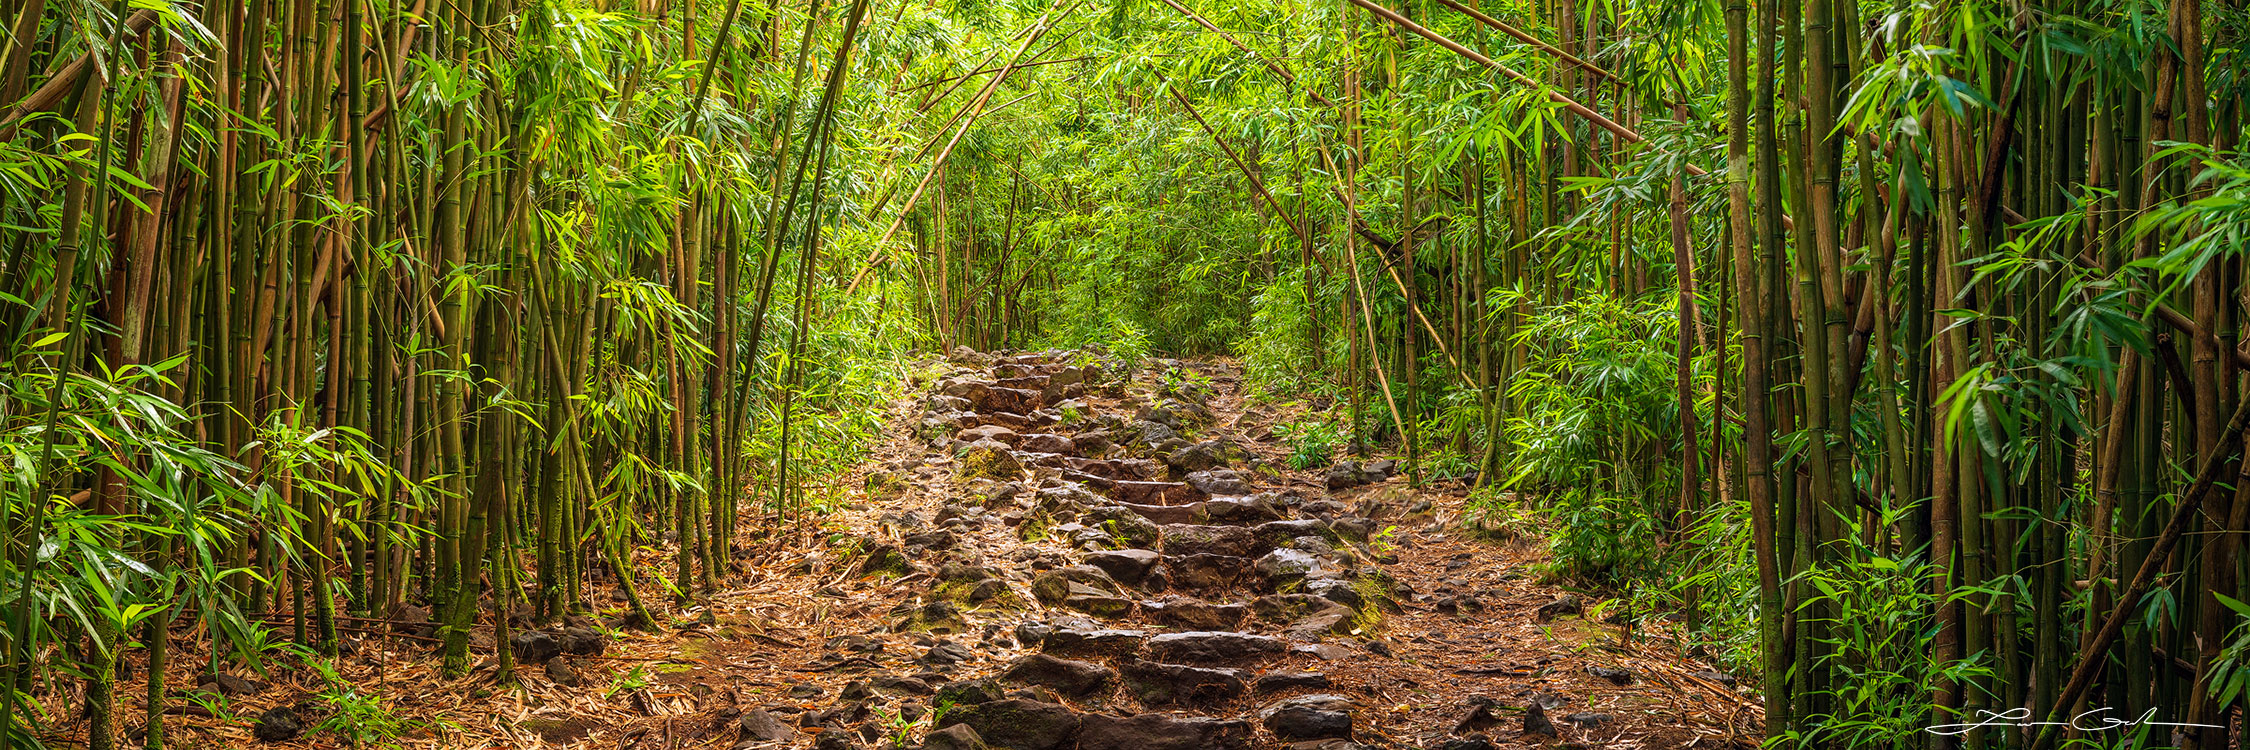 Panoramic fine art print of an ancient stone path ascending through a thick bamboo forest in Maui, Hawaii, titled "The Forgotten Way" - Gintchin Fine Art.